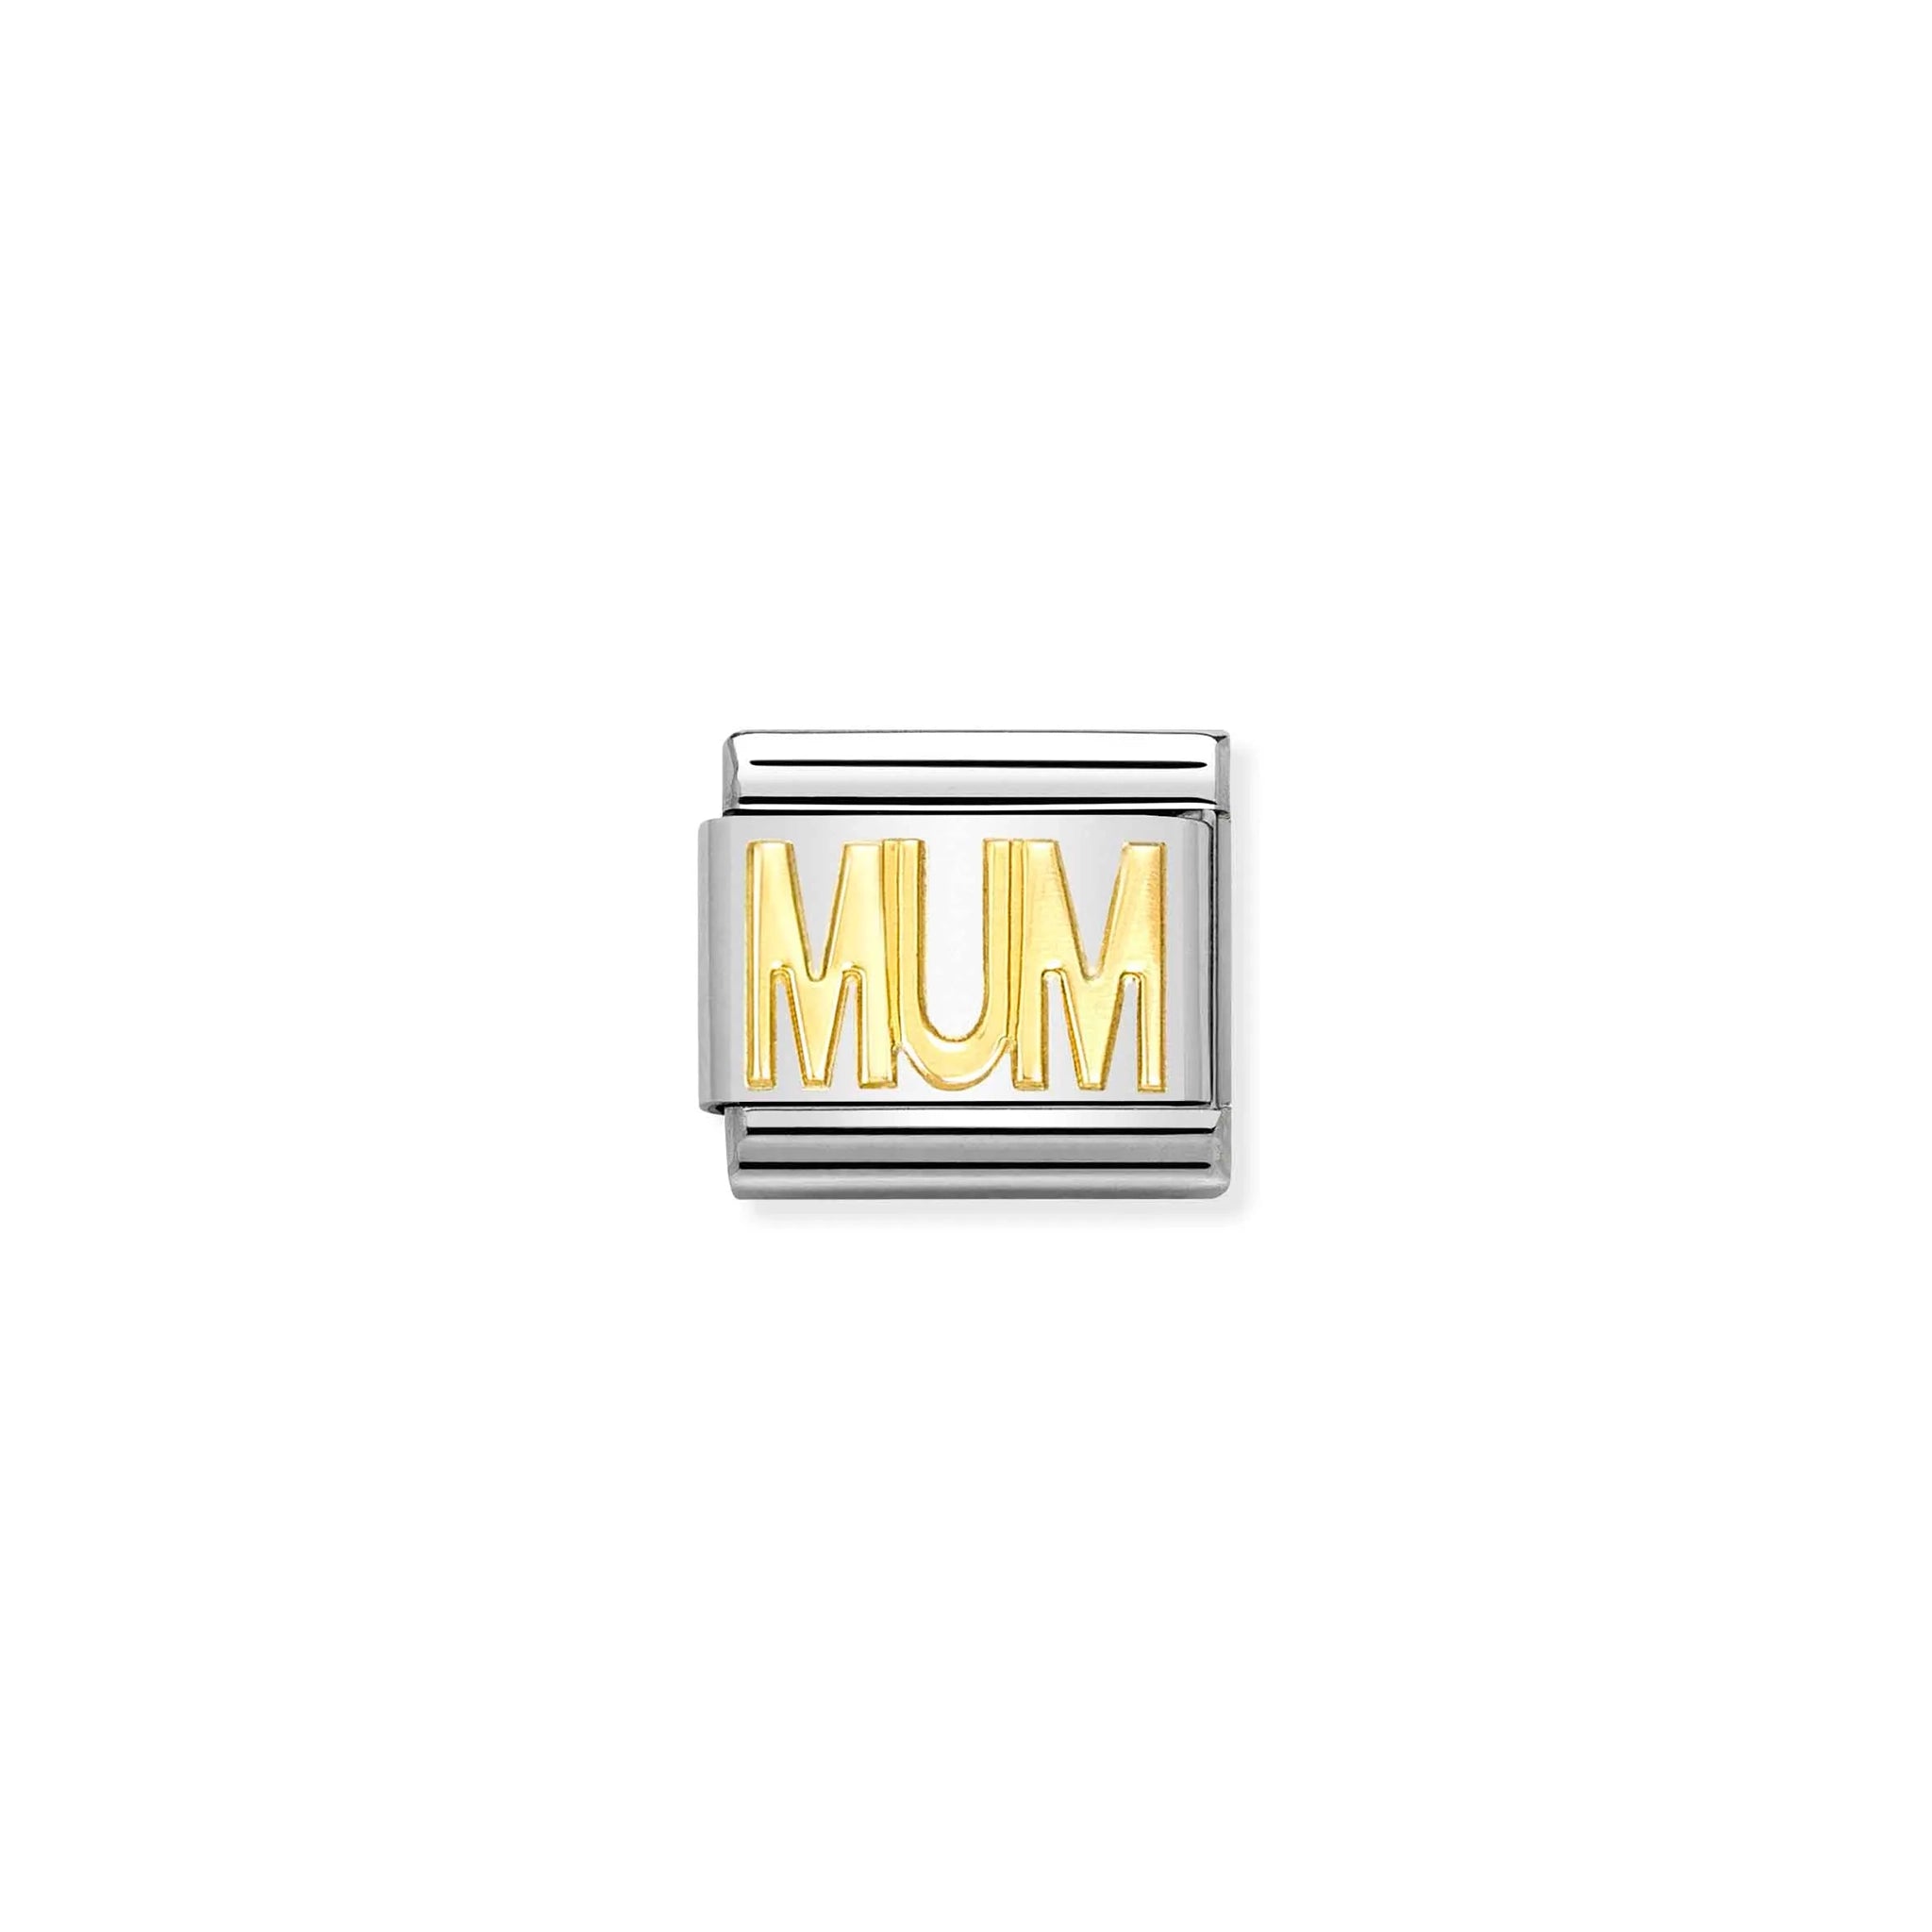 A Nomination charm link featuring the word 'MUM' in plain gold capital letters